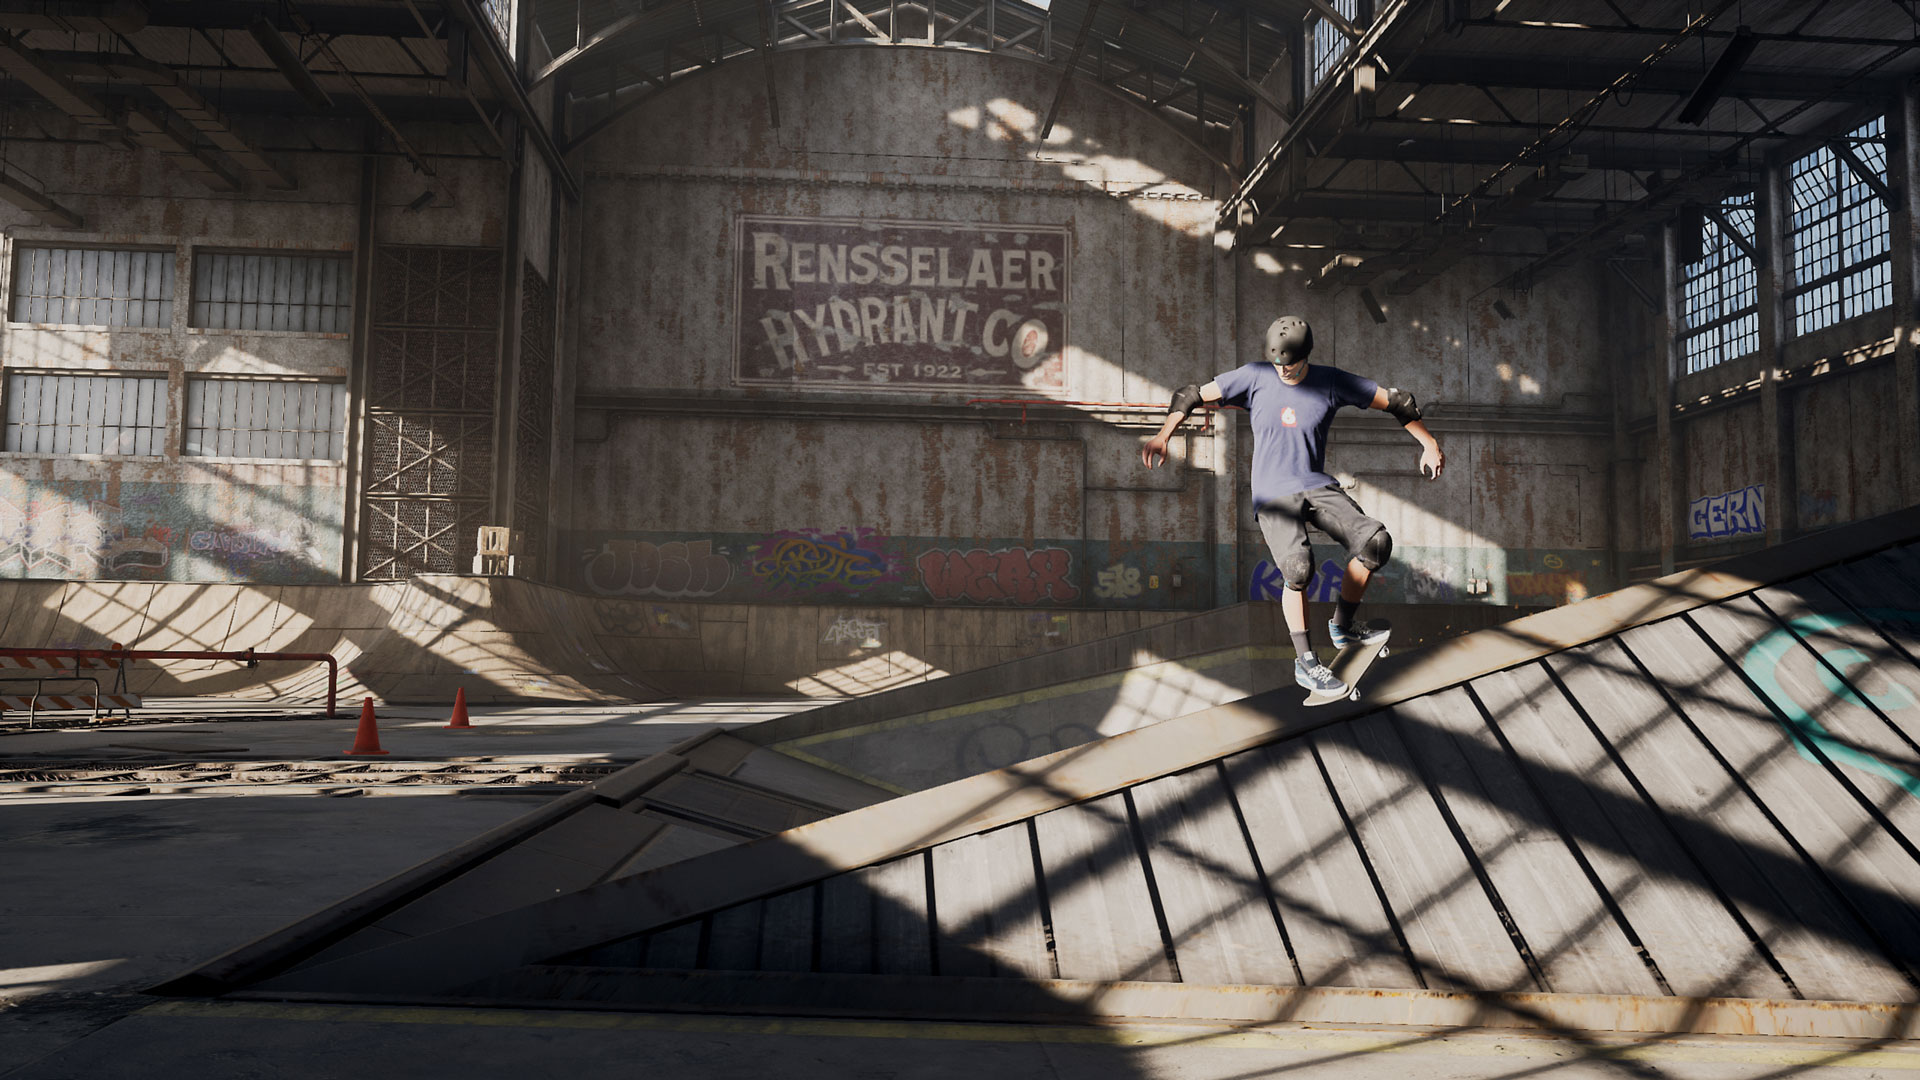 Tony Hawk's Pro Skater 1 And 2 Remasters Officially Revealed, But They're  Skipping Switch